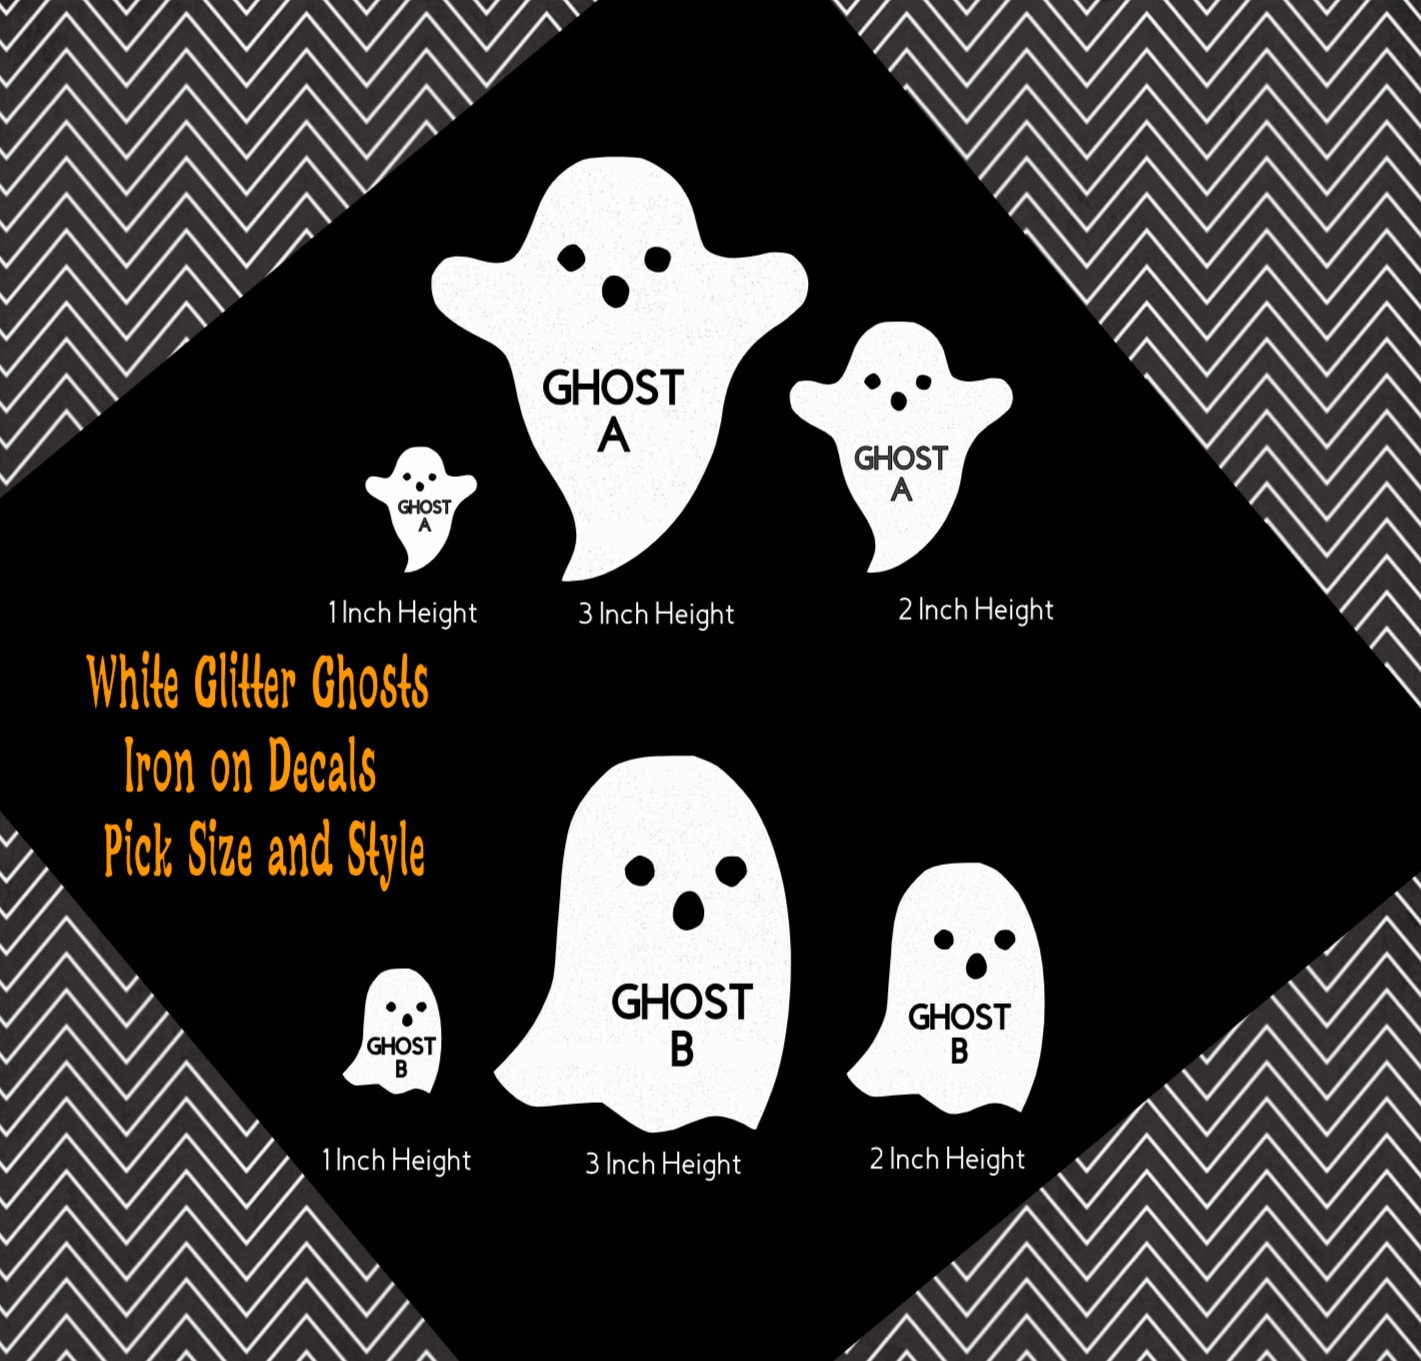 10 White Glitter Ghosts Iron on Decals, Pick Size & Style, Halloween  Crafts, Halloween Decals, Ghost Decal, Spooky Halloween, Heat Transfer 